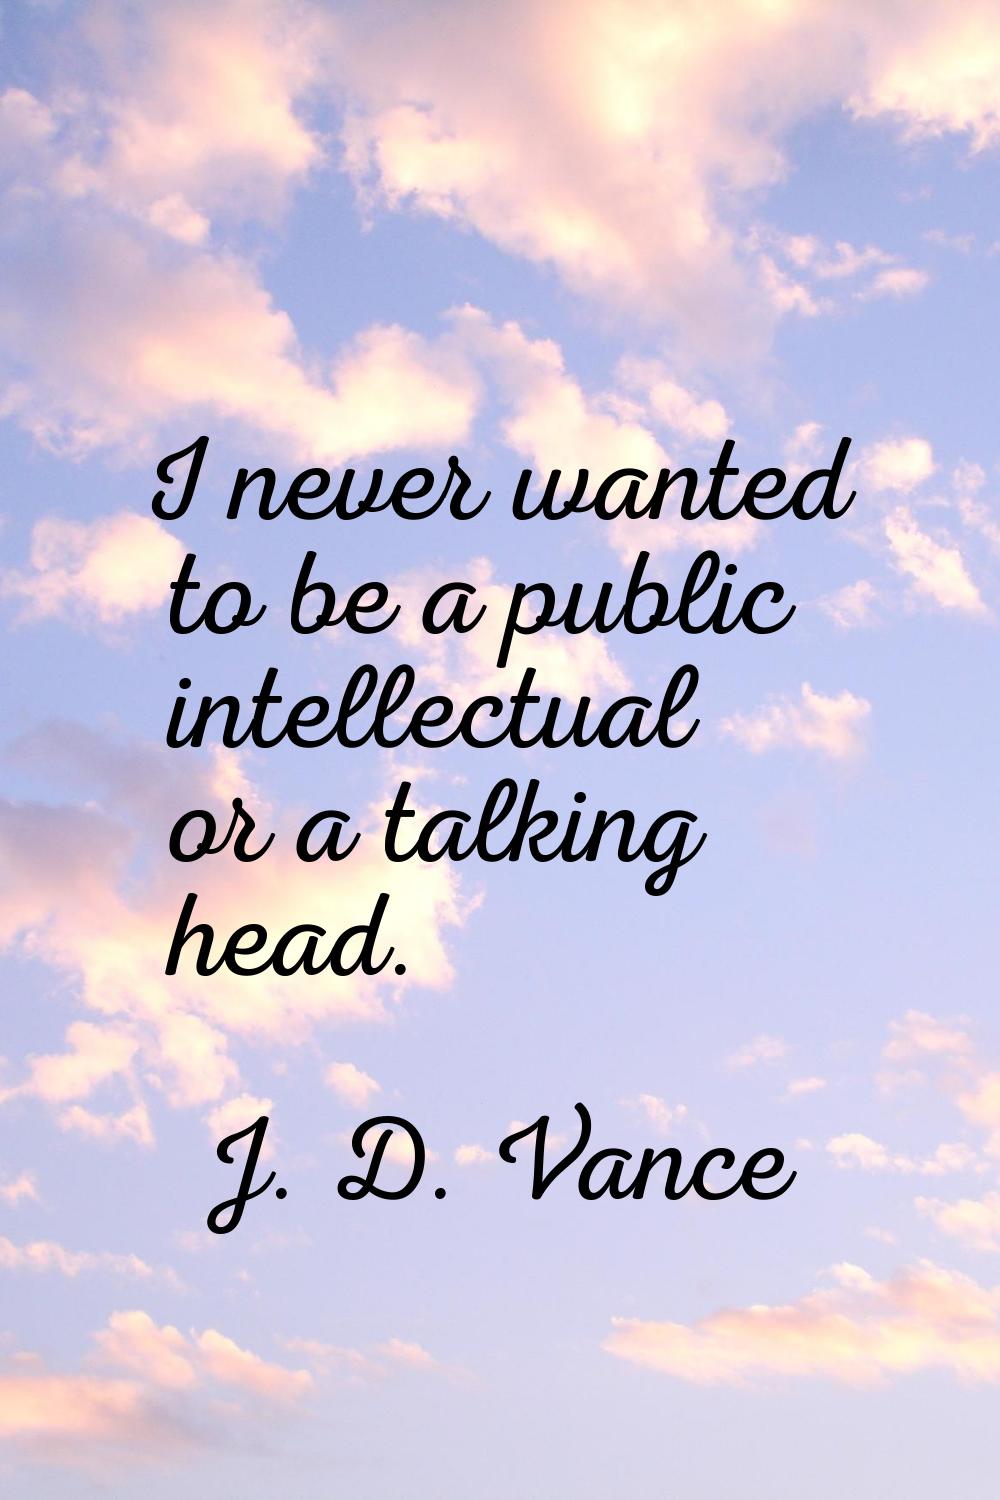 I never wanted to be a public intellectual or a talking head.